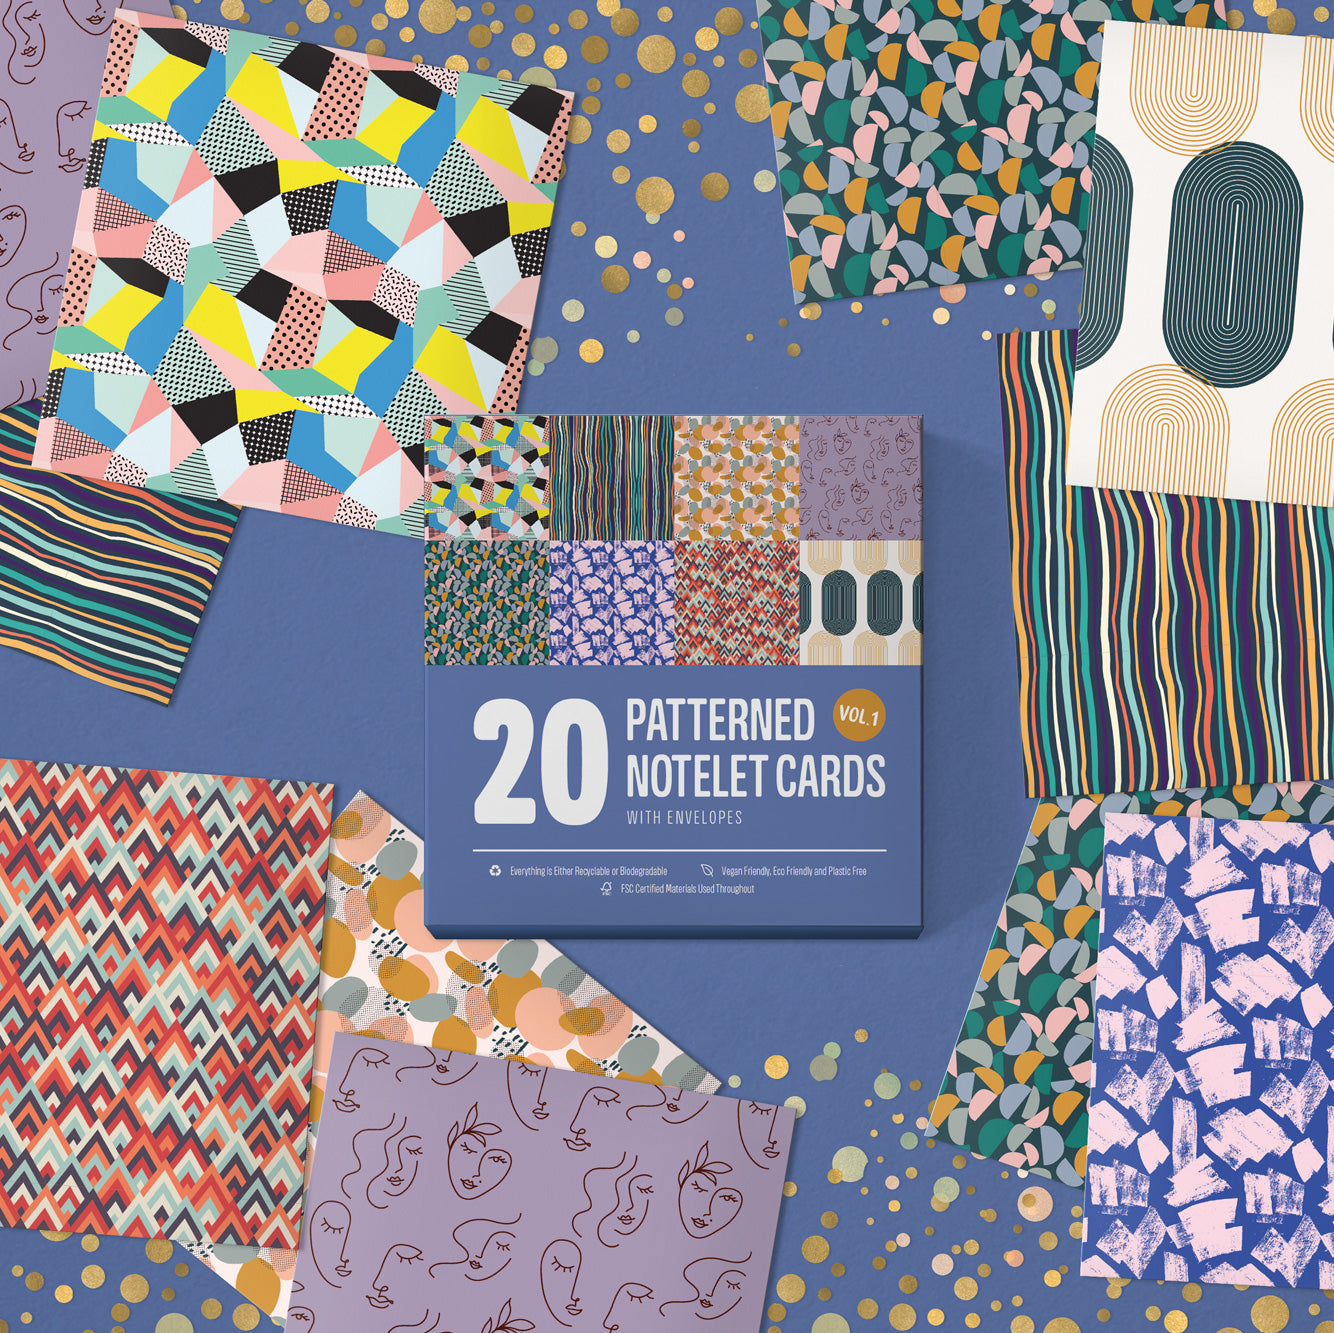 Trendy Pack of Notelet Cards | 20 Cards Envelopes | Notelets Suitable For All Occasions